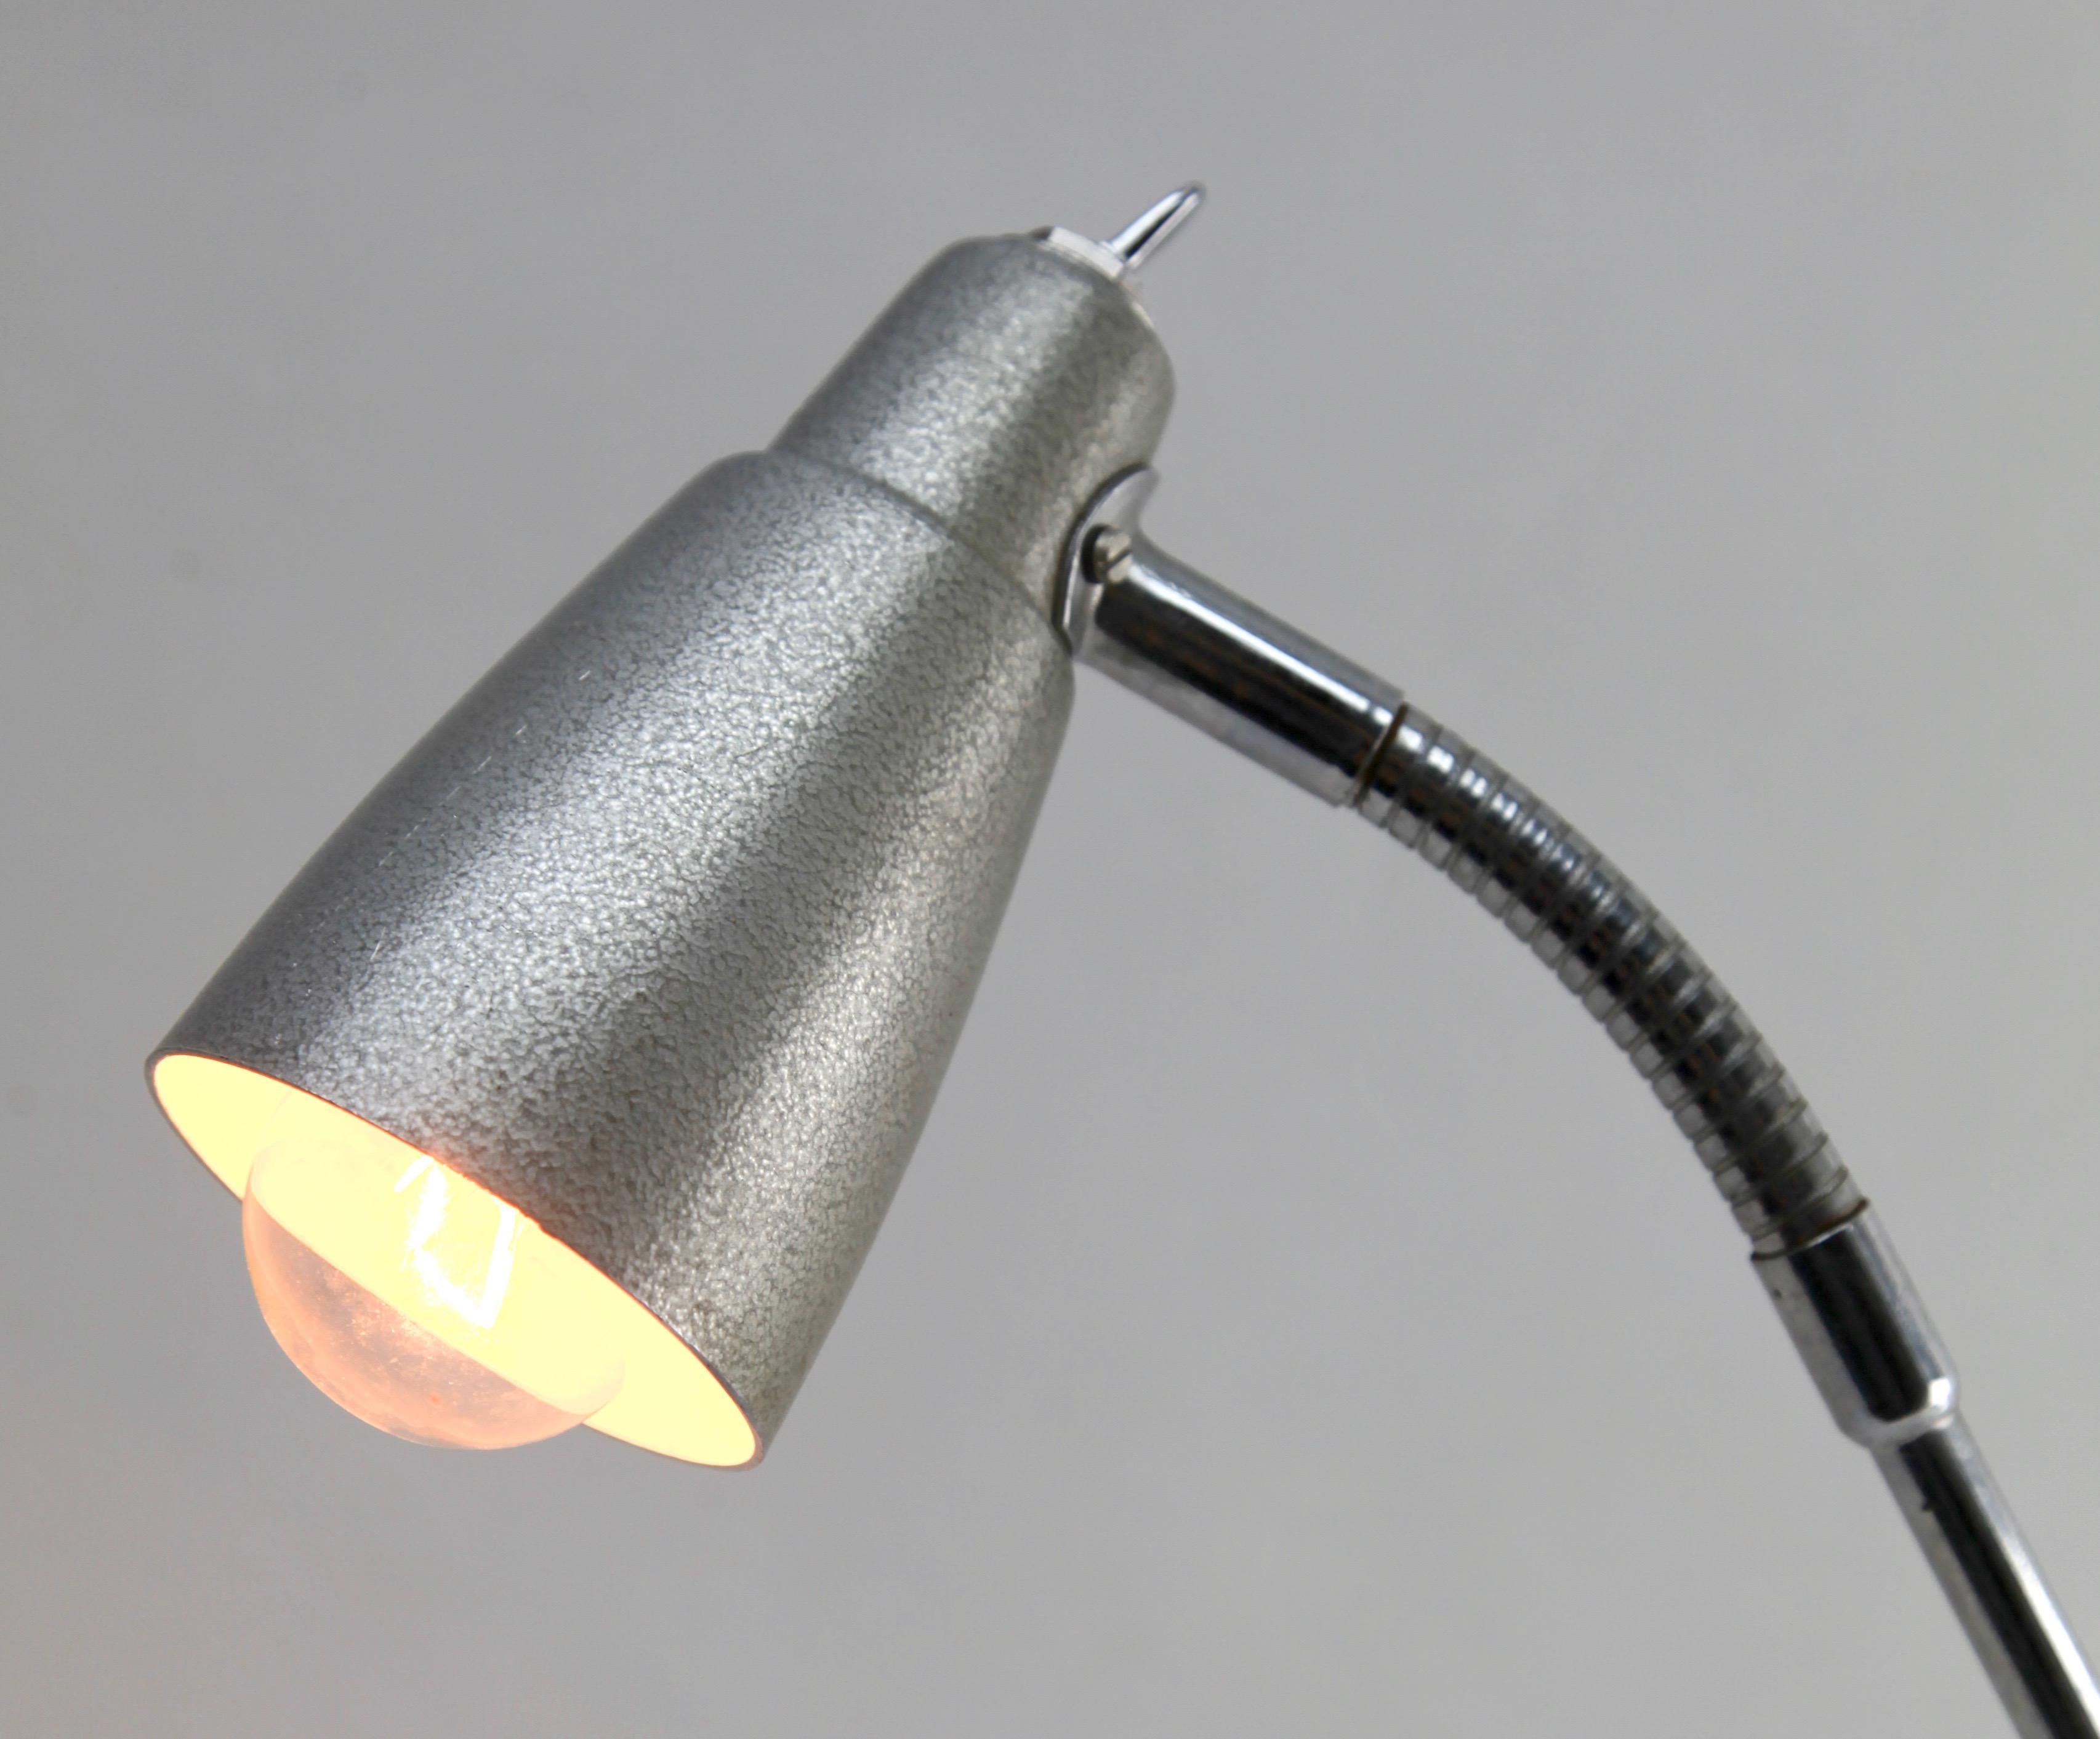 German Industrial Anglepoise Lamp 'Silver-Grey' with Adjustable and Flexible Sections